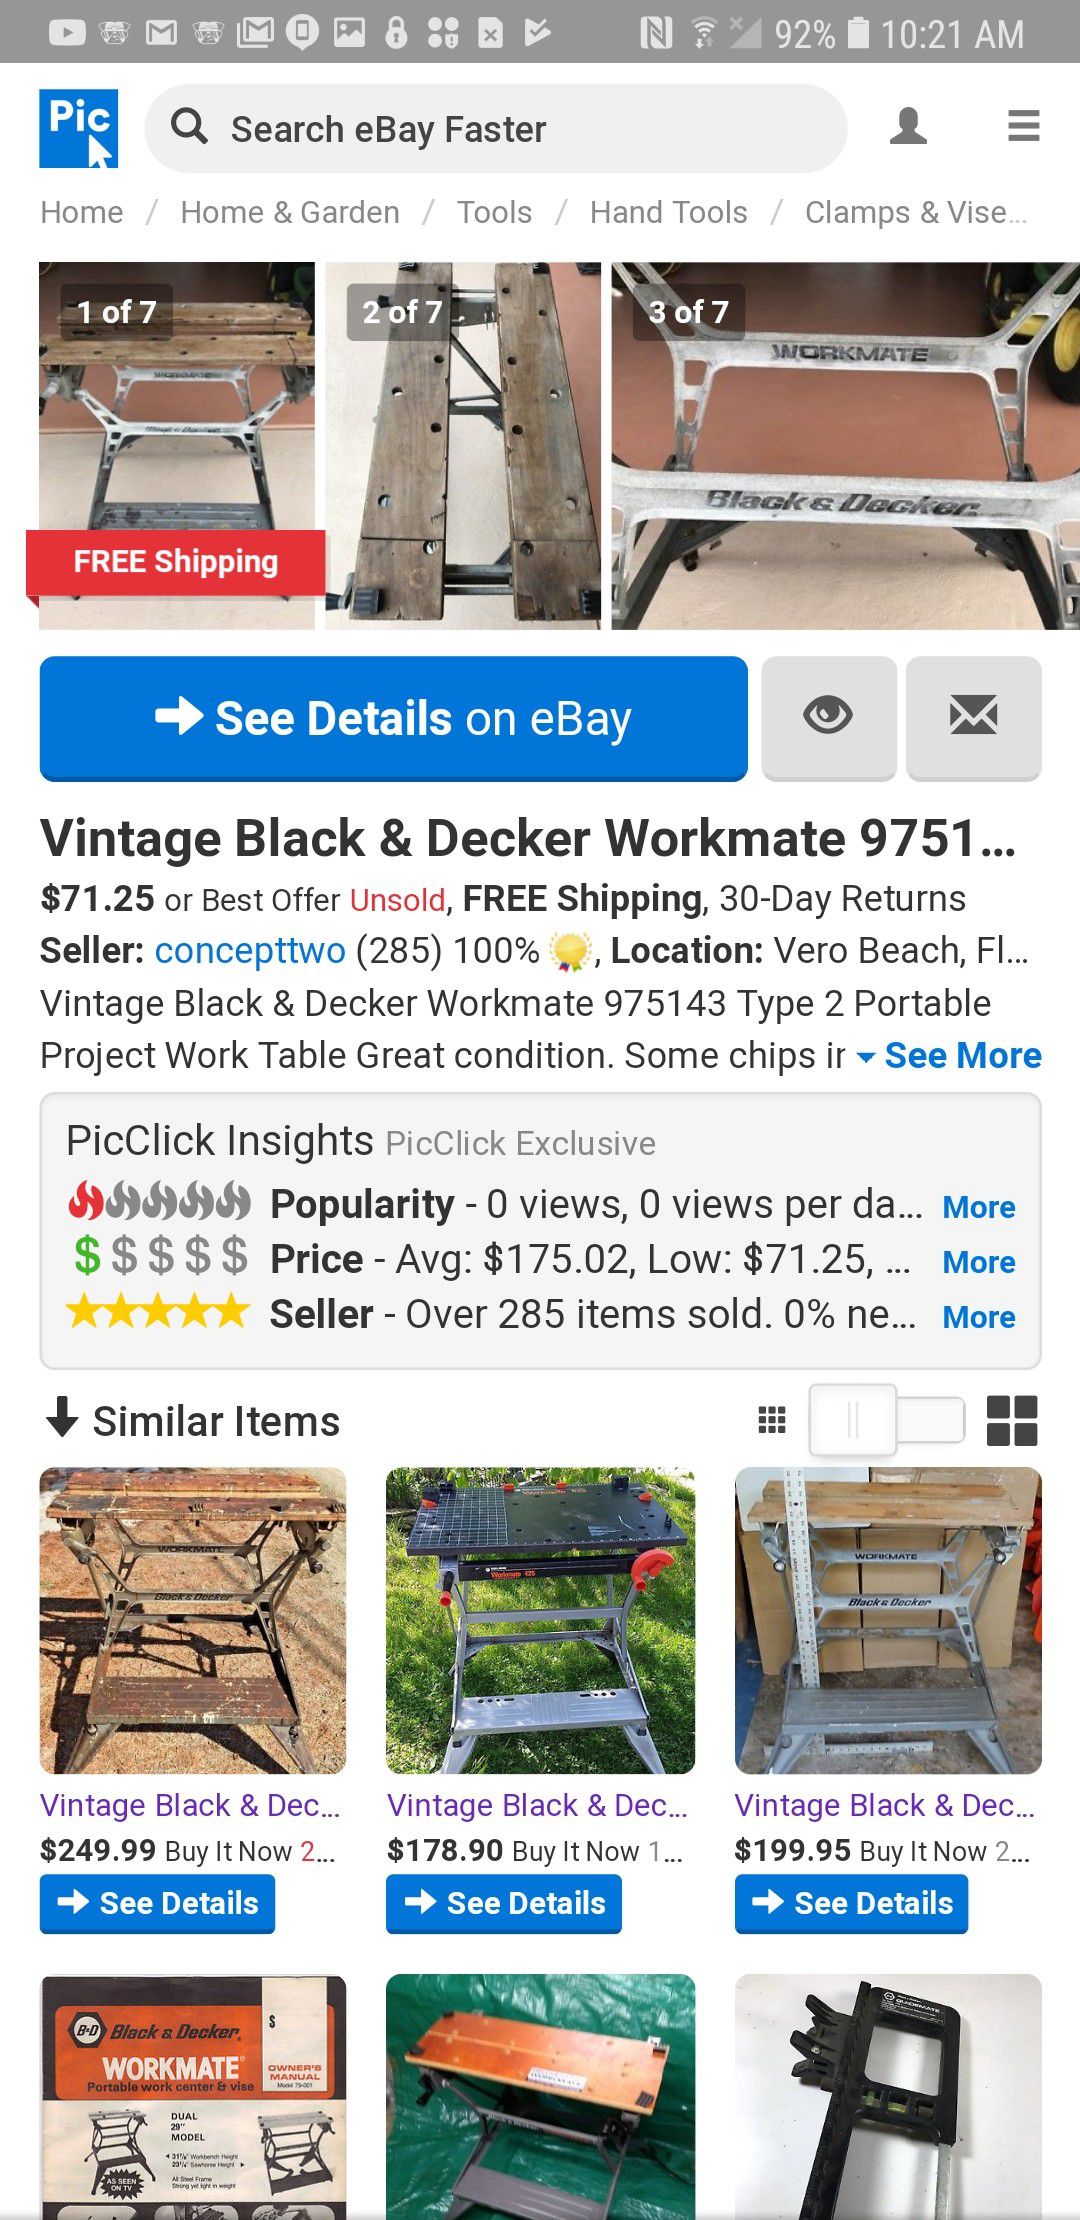 BLACK+DECKER Ready to Build Workbench for Sale in Clairton, PA - OfferUp